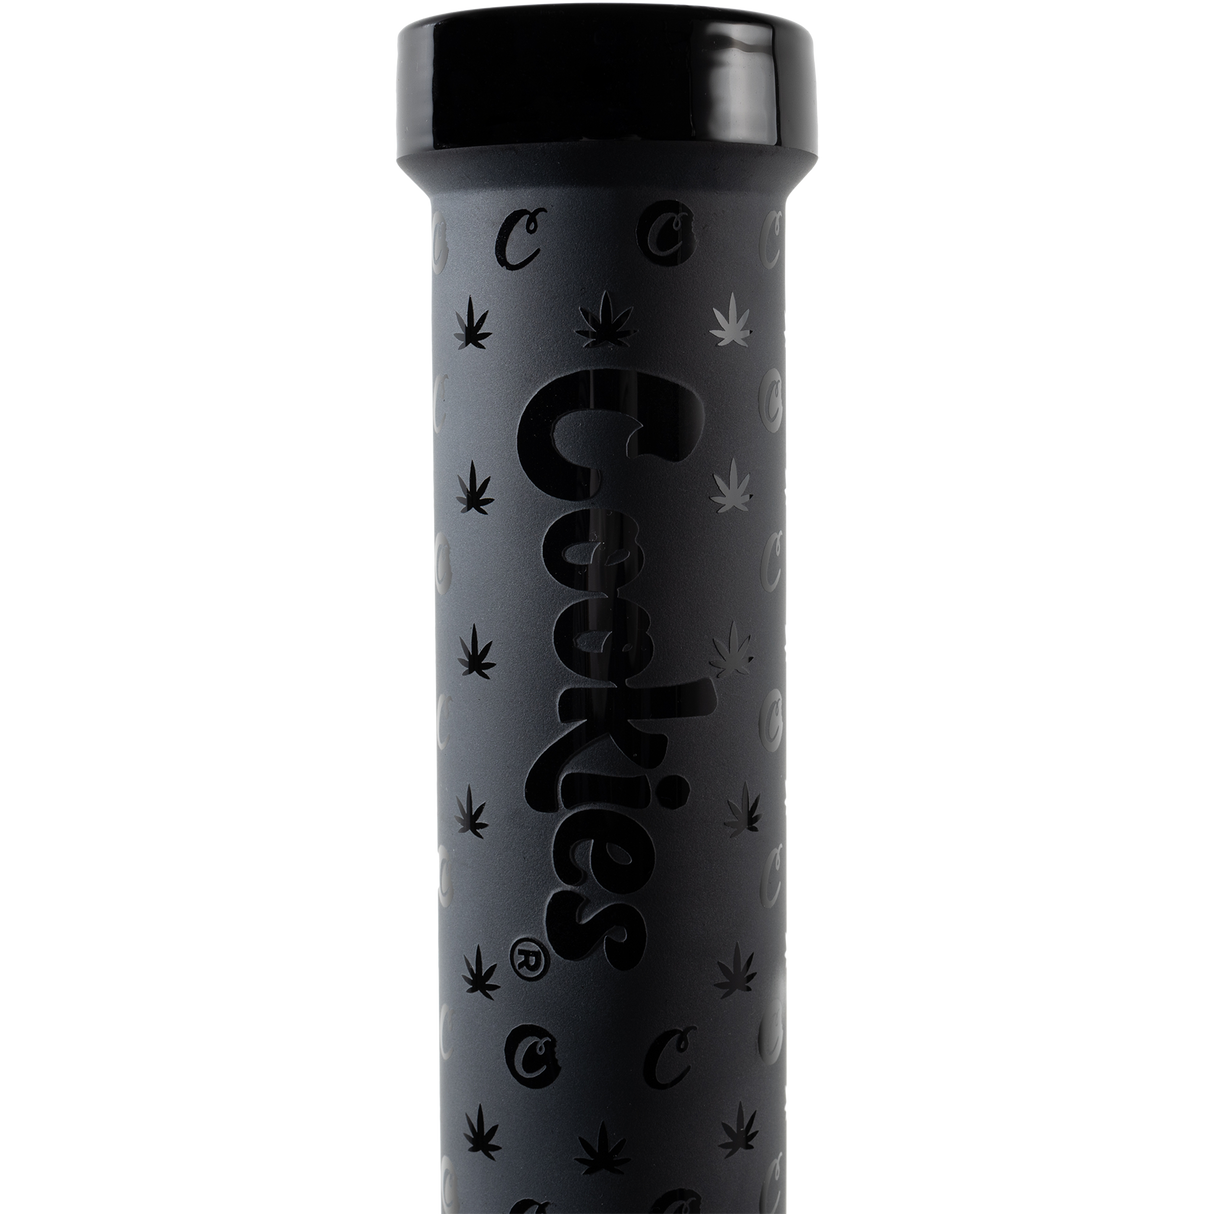 Cookies 14" Beaker Bong with Black & Silver Patterned Print for Dry Herbs - Front View